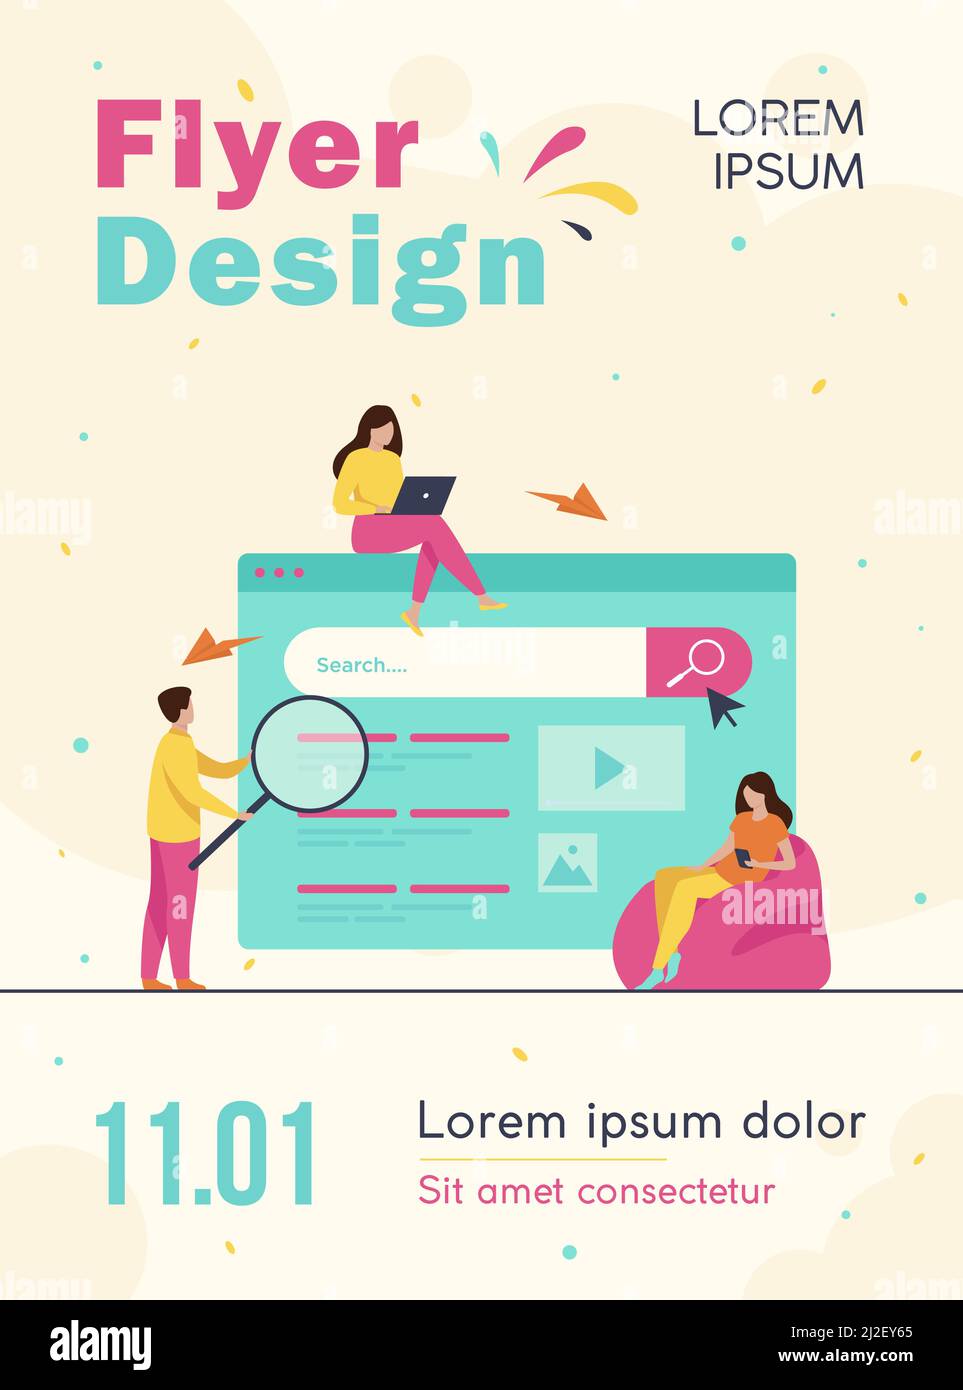 People using search box for query, engine giving result. Vector illustration for SEO work, SERP, online promotion, content marketing concept Stock Vector